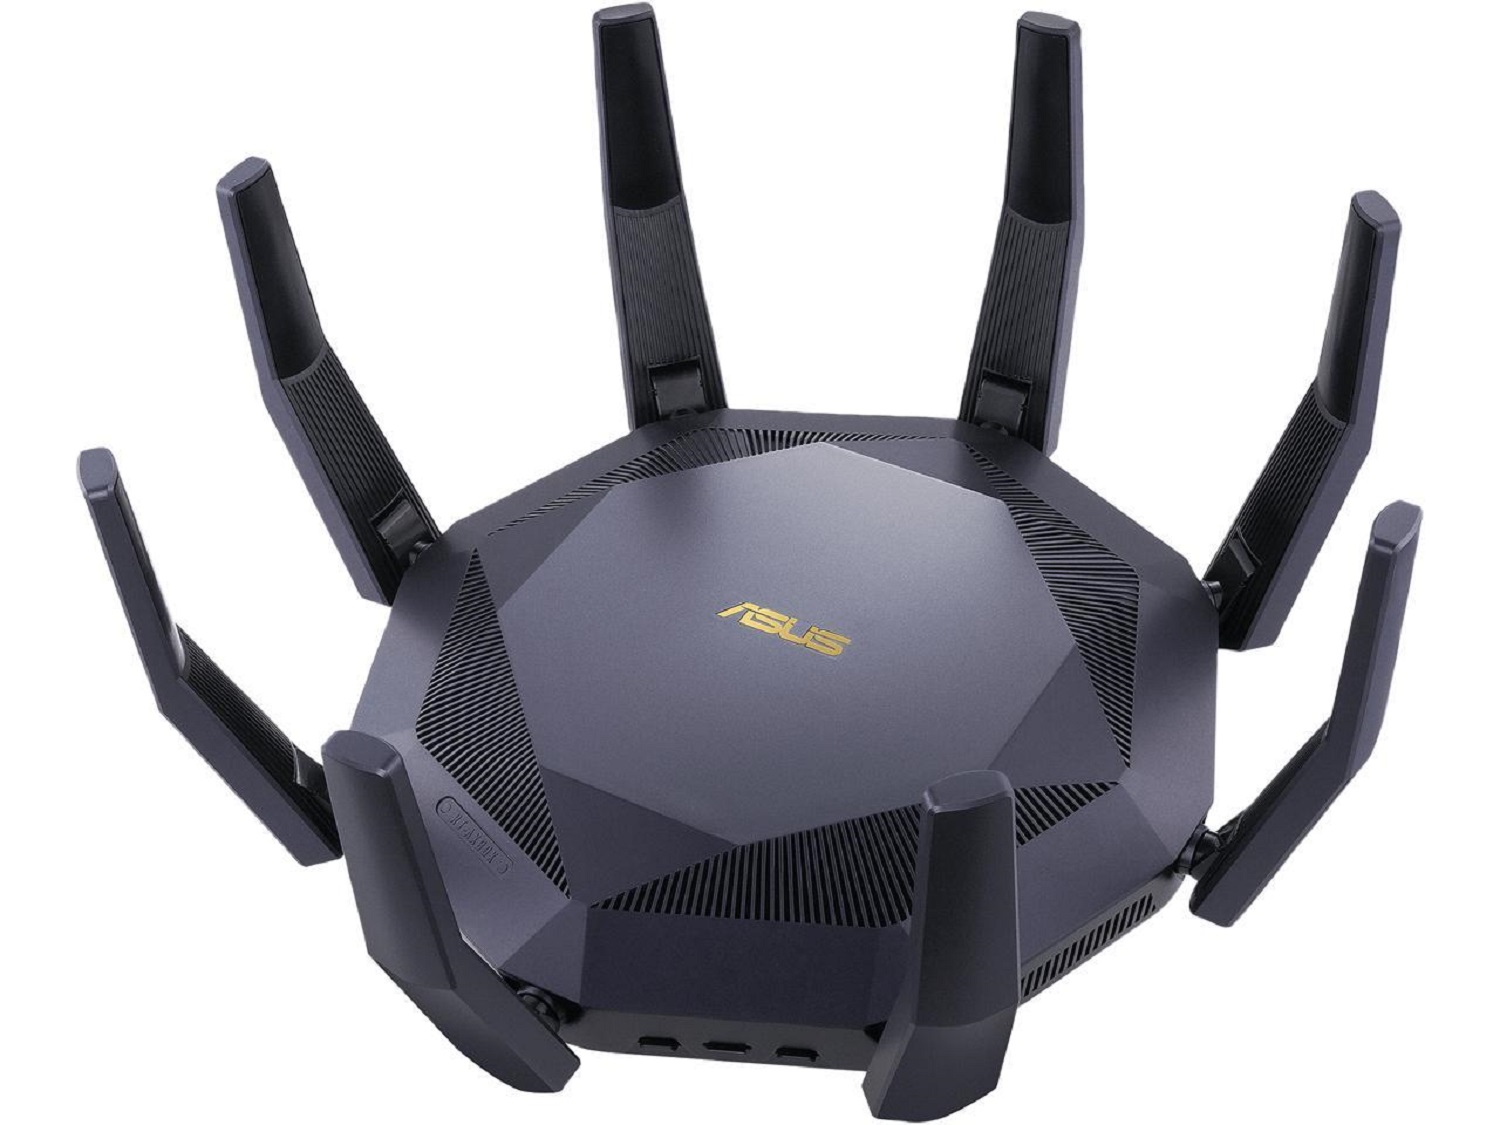 WiFi 6E Routers Introduced By Netgear Linksys TP Link At CES The 